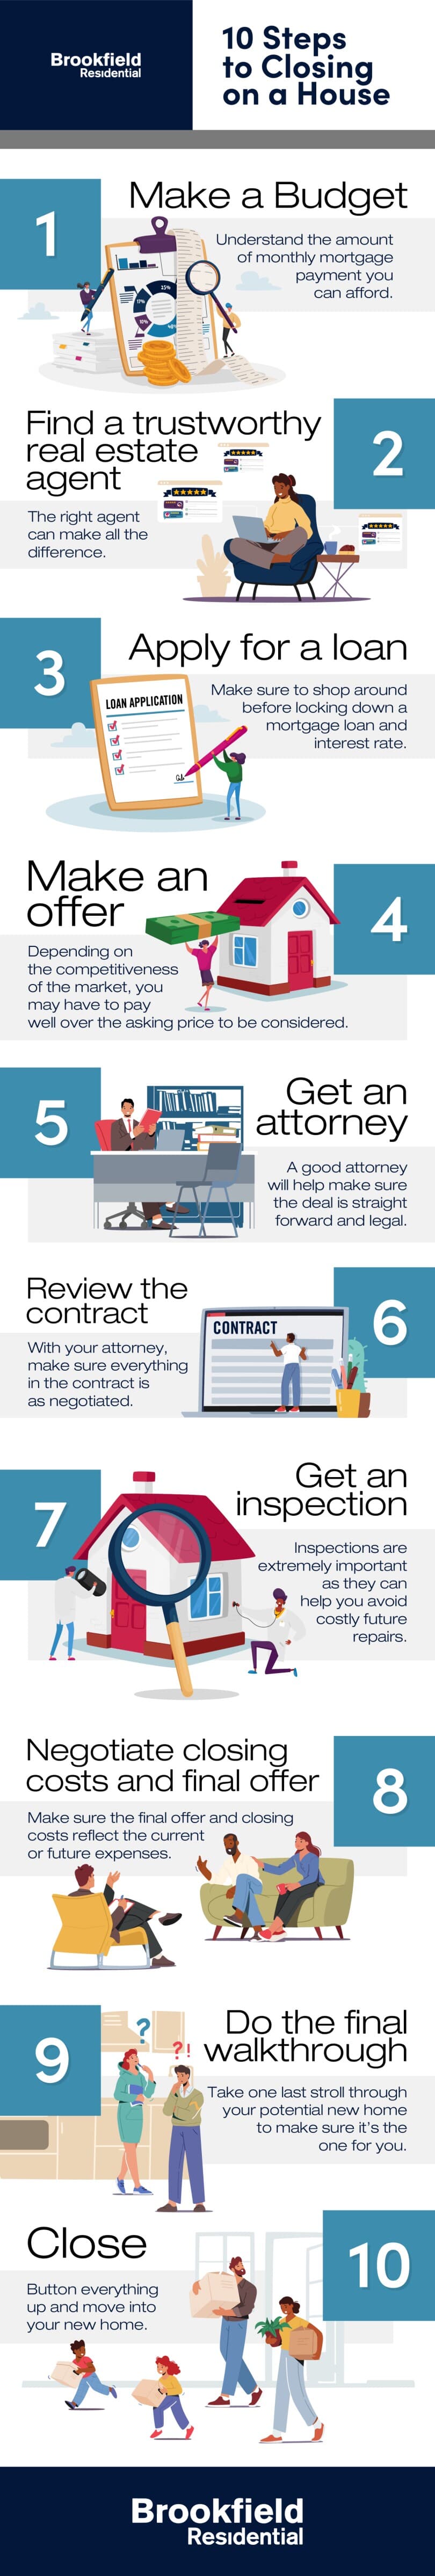 10 Steps to Closing on a House Infographic